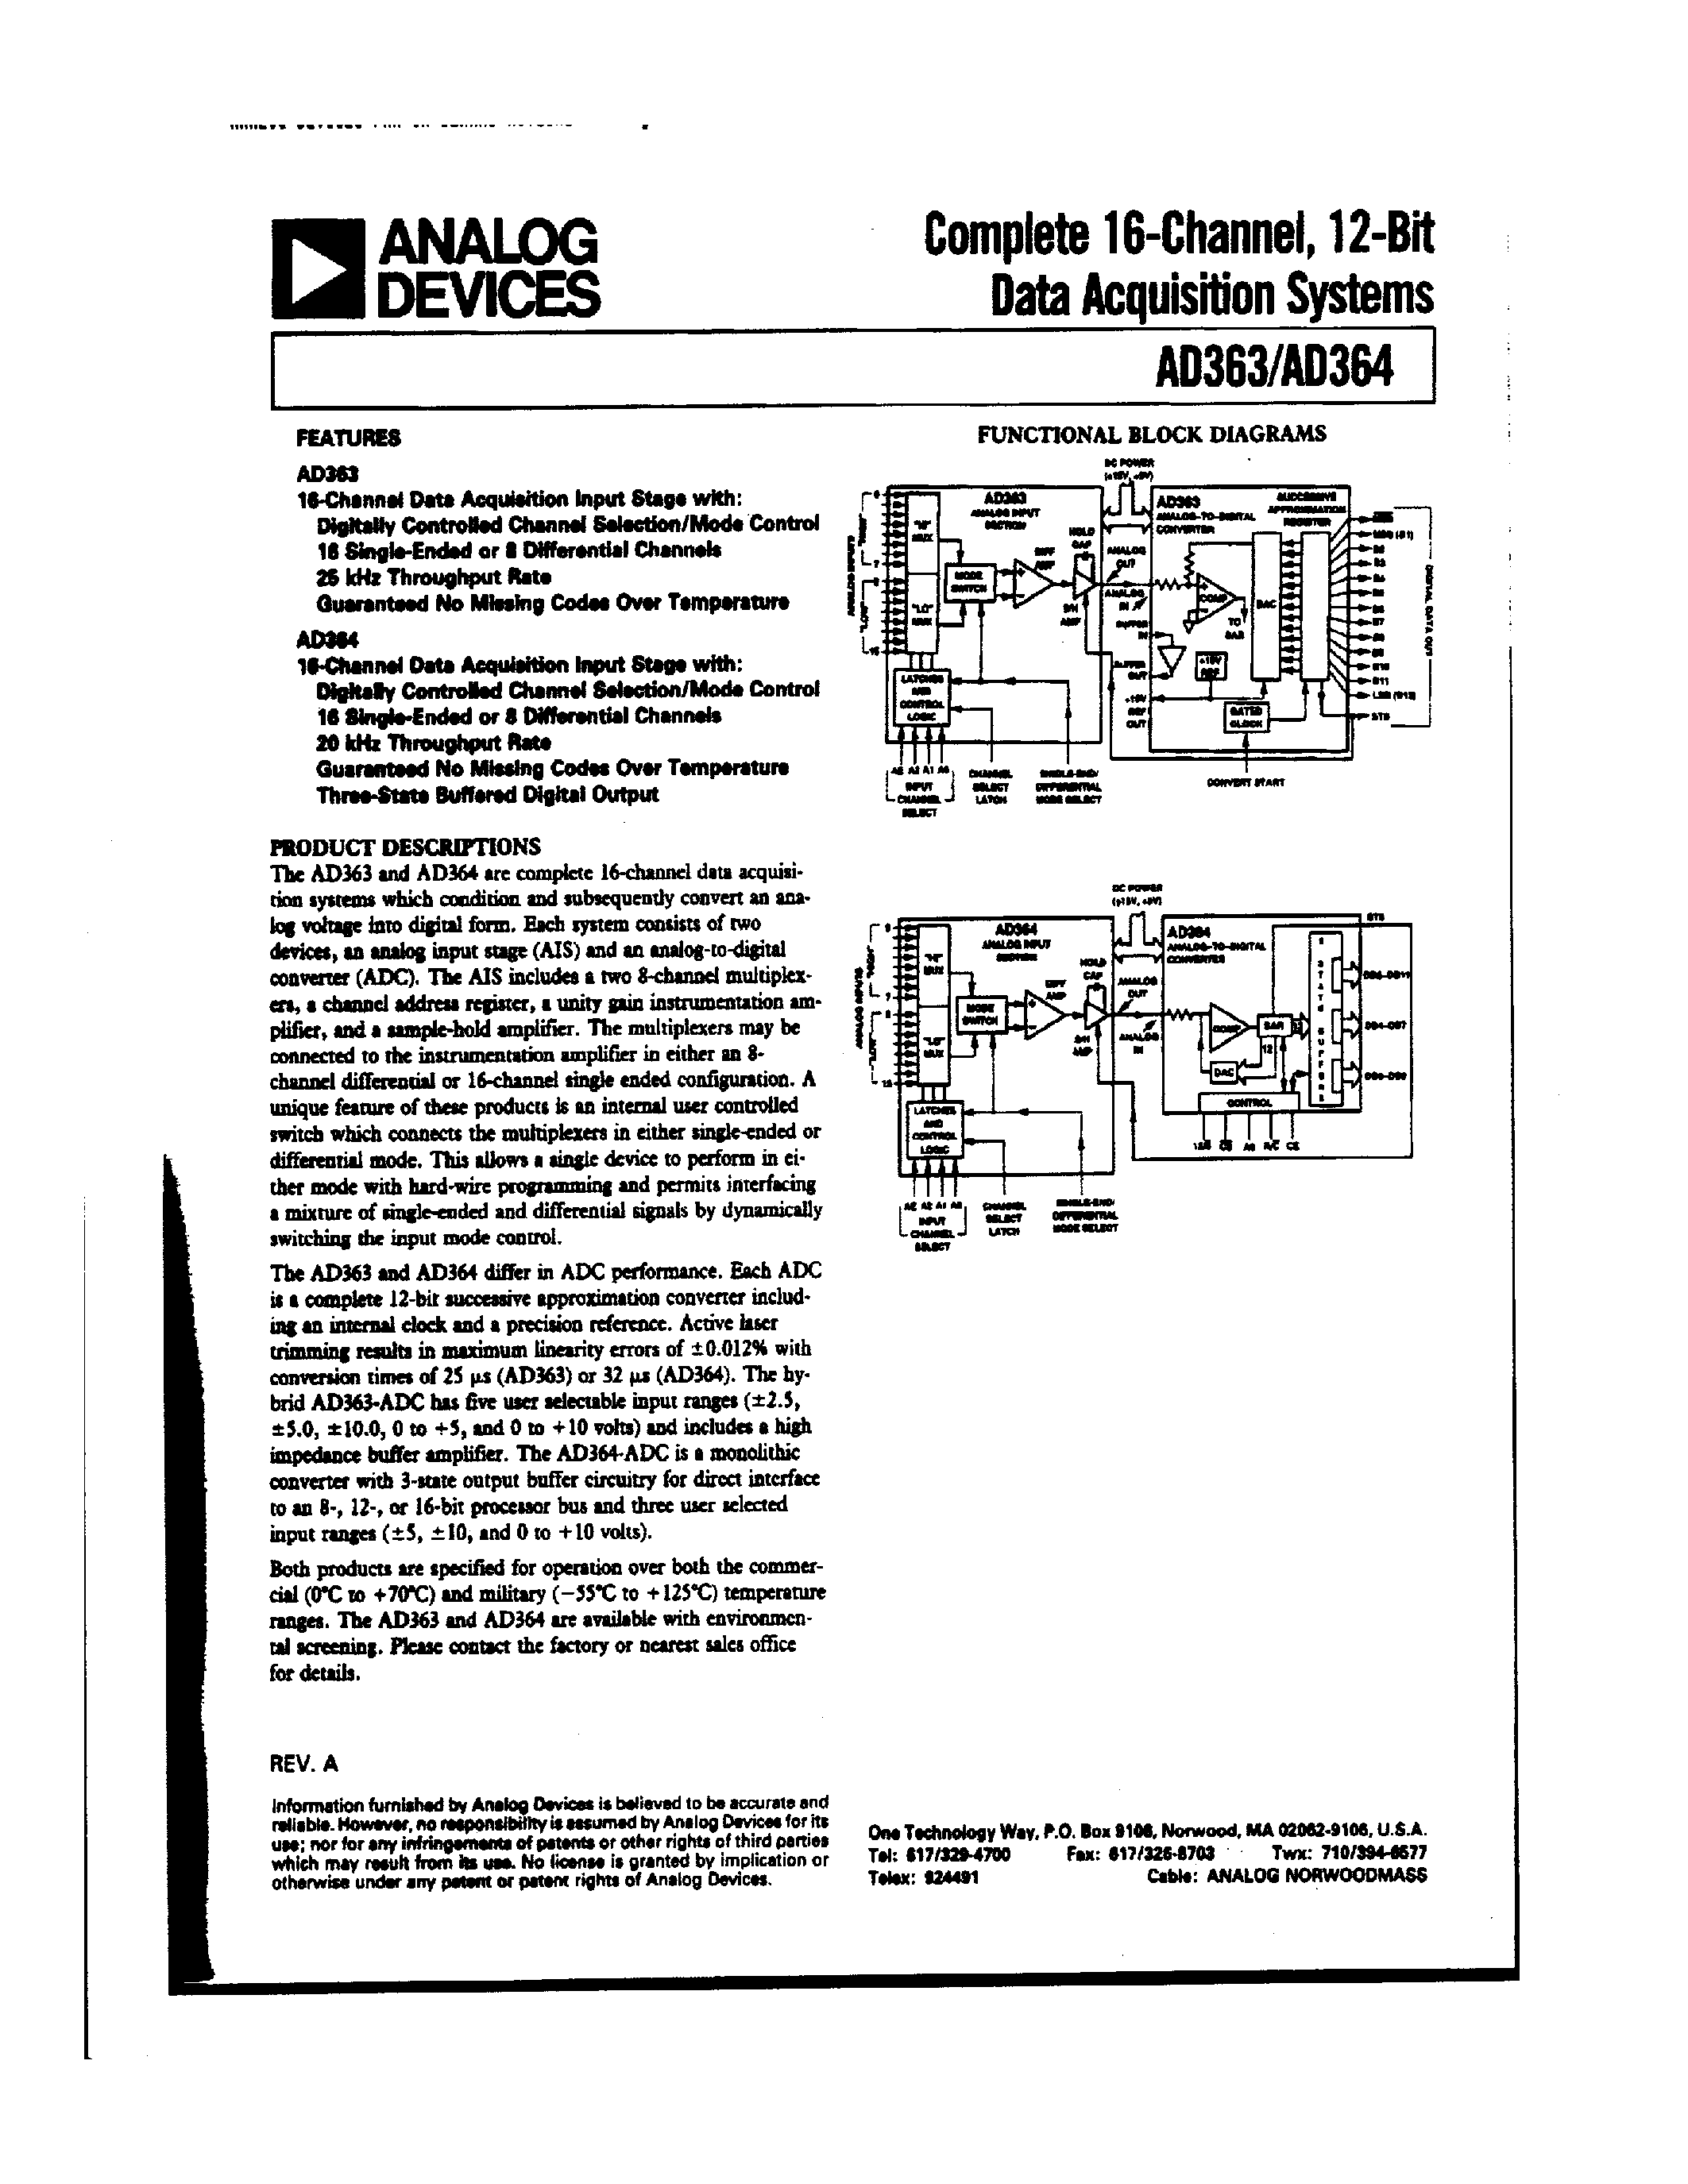 Datasheet AD363 - Complete 16-Channel/12-Bit Data Acquisition System page 1